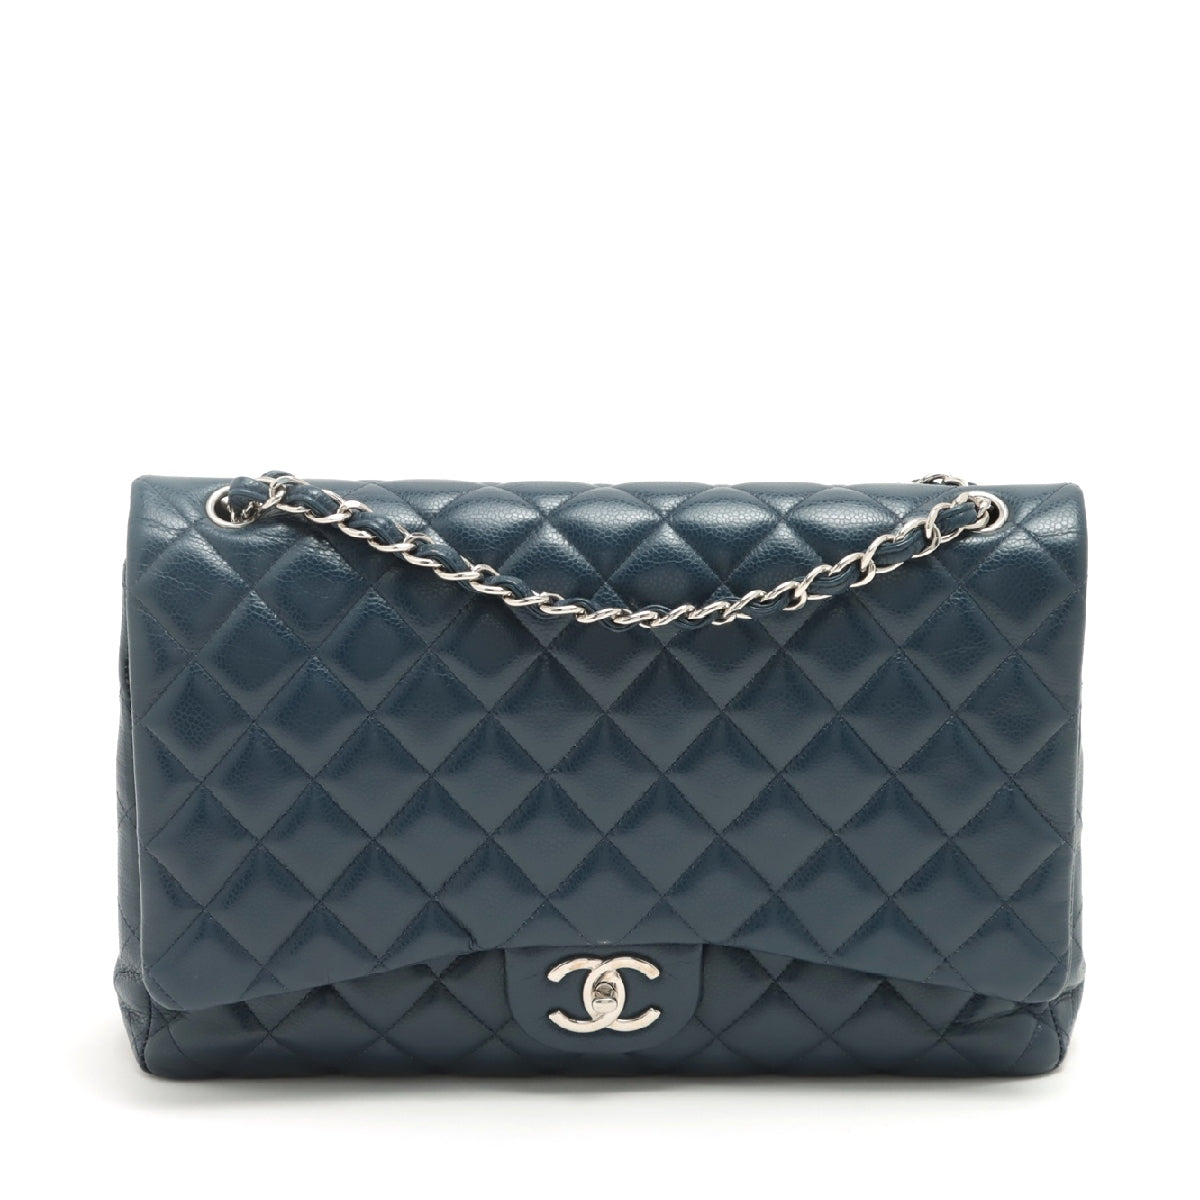 Chanel Big Matelasse Caviarskin Double flap Double chain bag Blue Silver Metal fittings 15XXXXXX